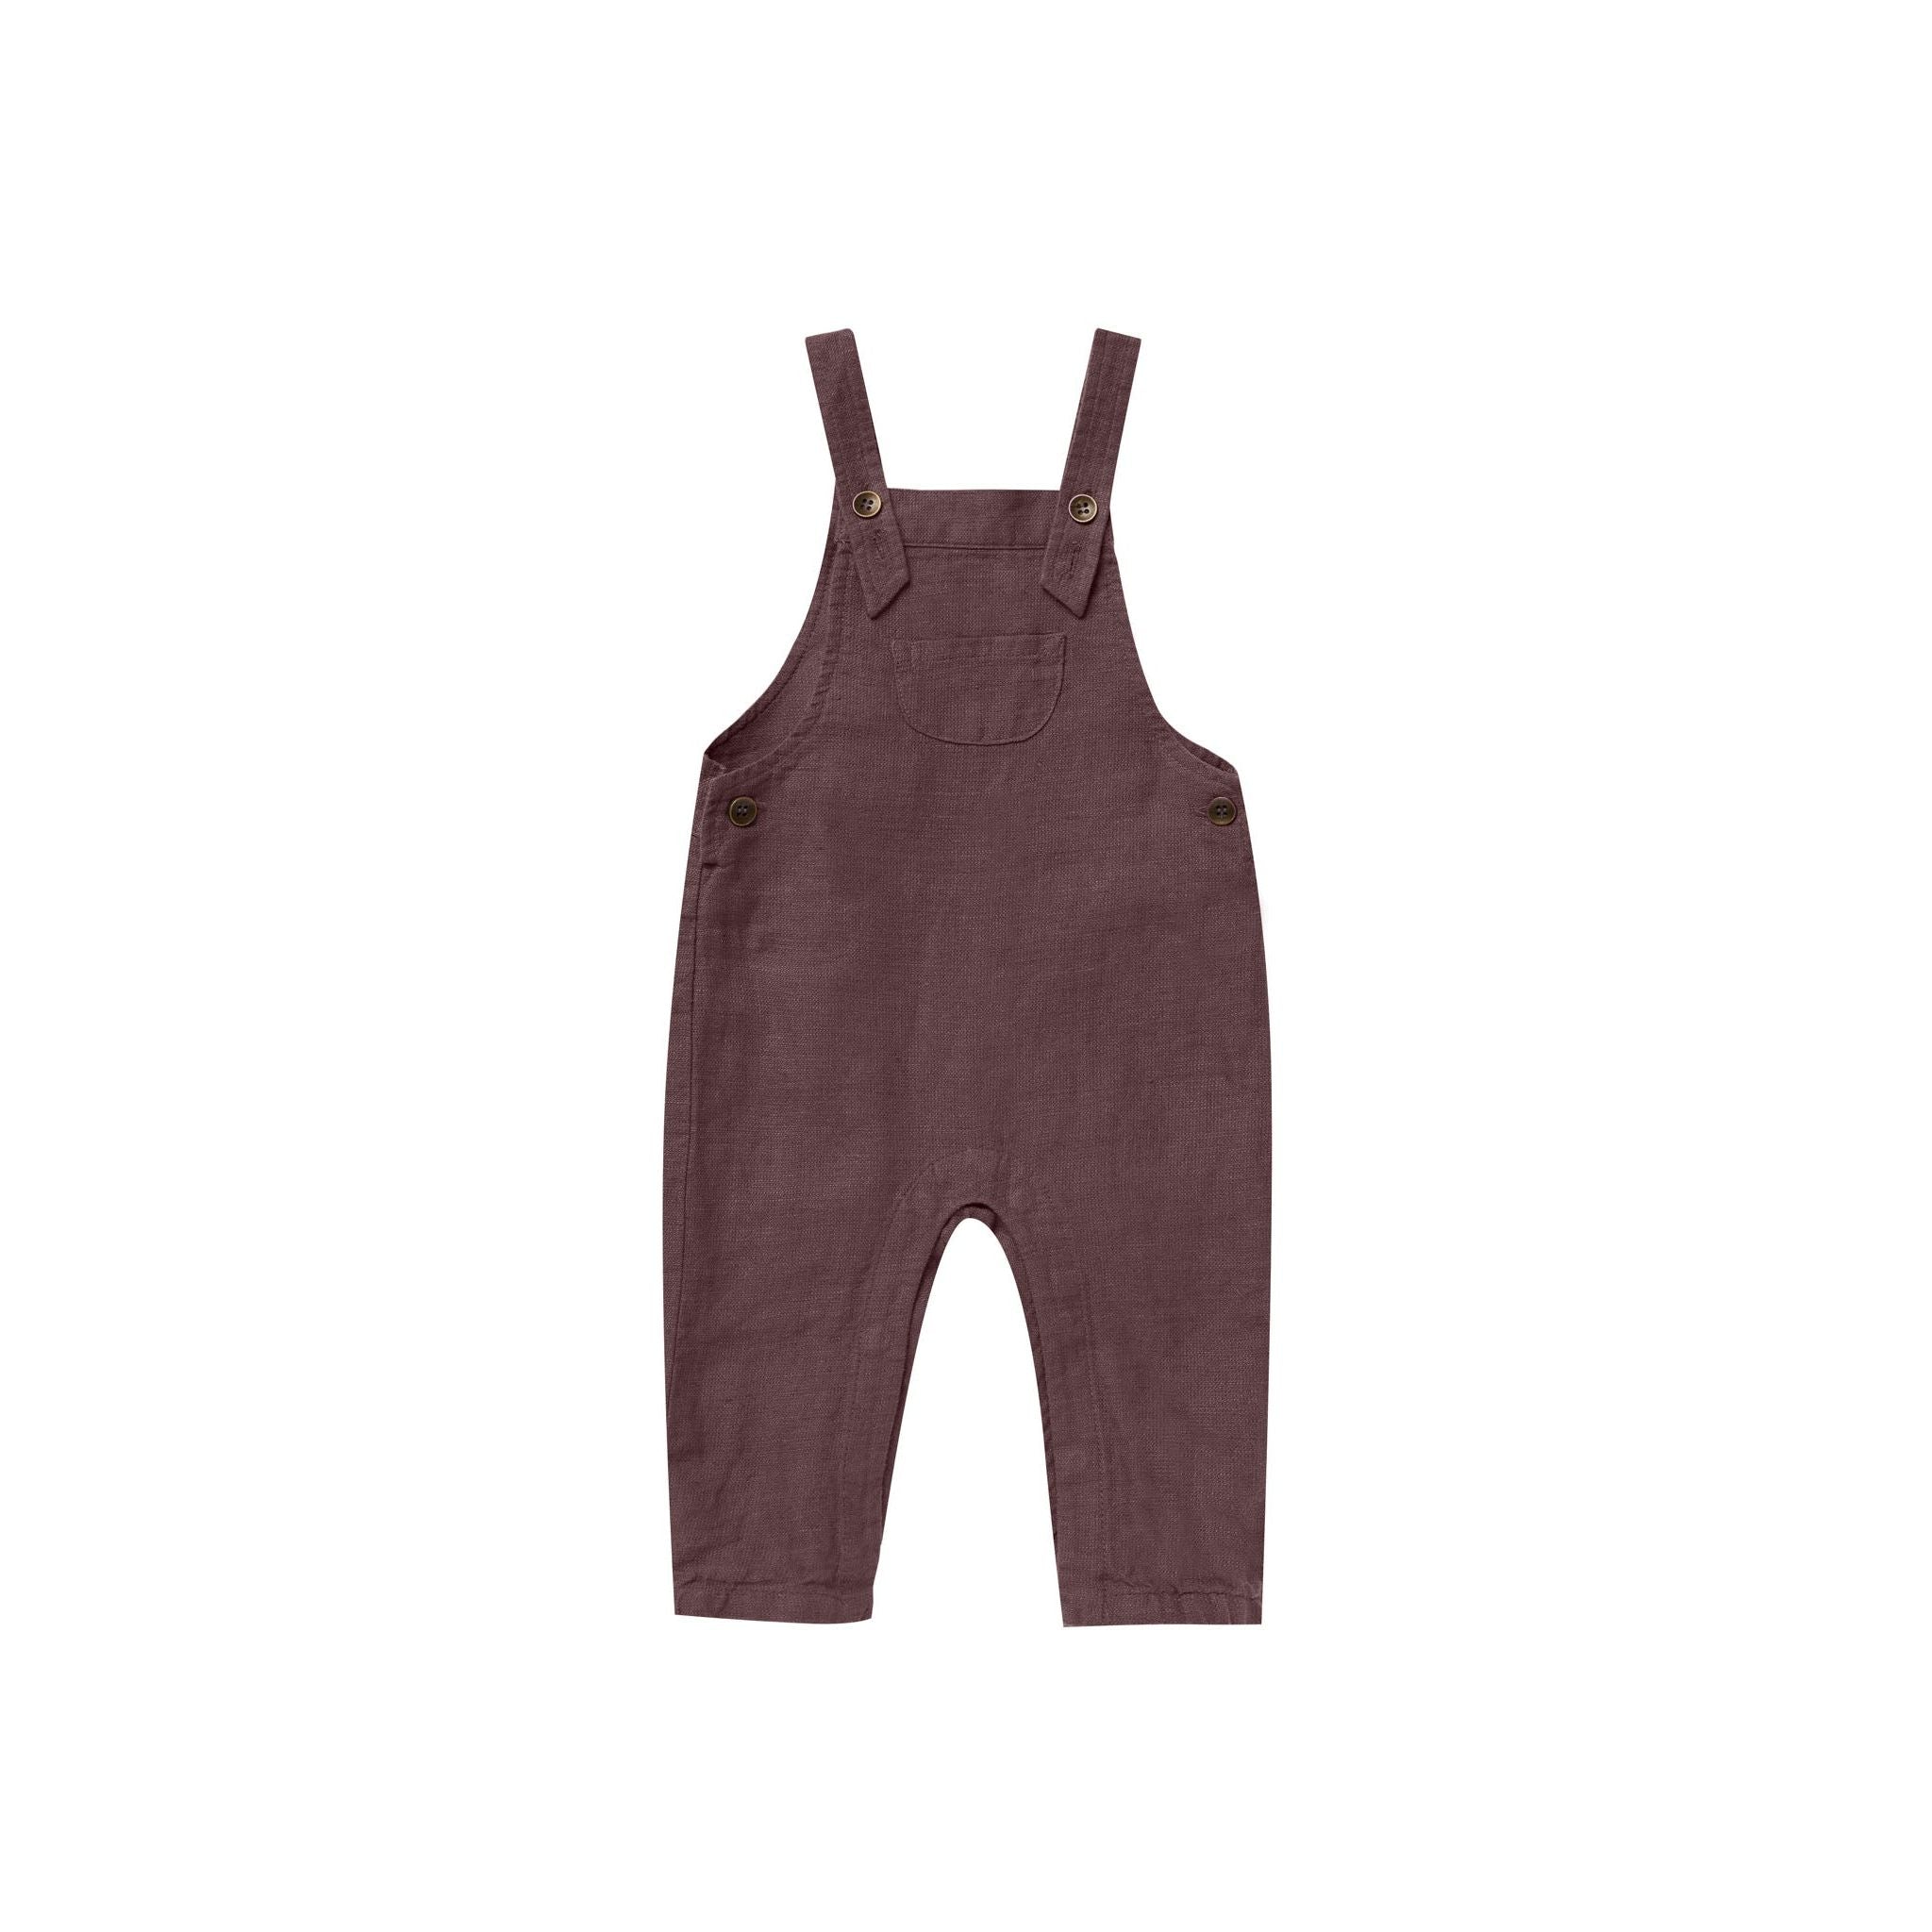 plum colored baby overalls